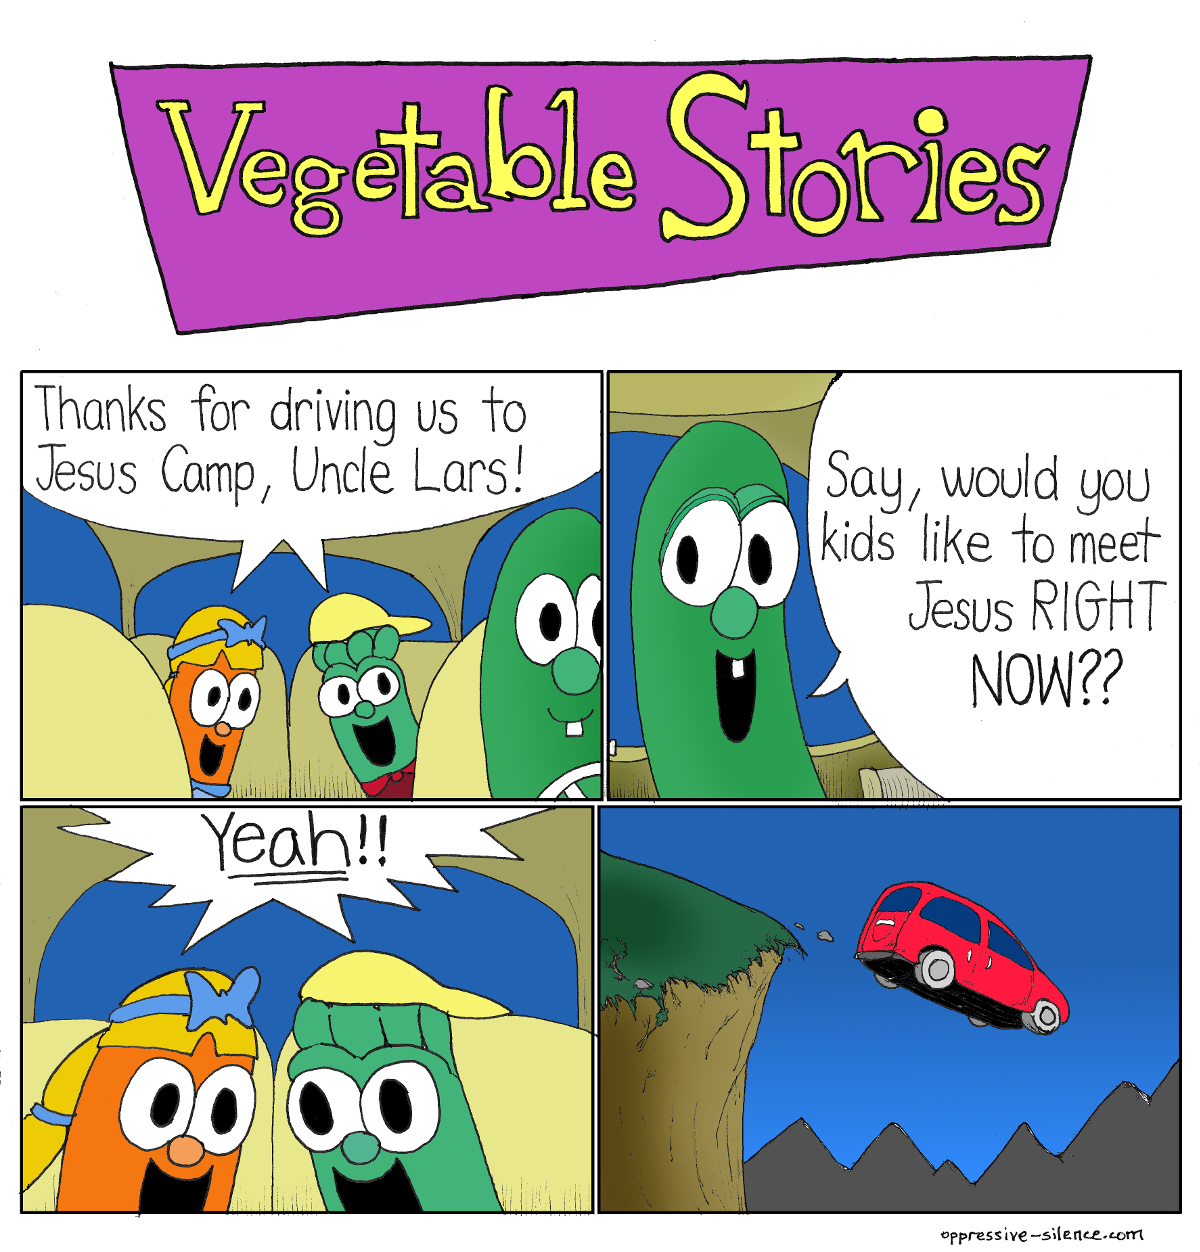 vegetable stories comic - Vegetable Stories Thanks for driving us to Jesus Camp, Uncle Lars! Say, would you | kids to meet Jesus Right Now?? Yeah!!